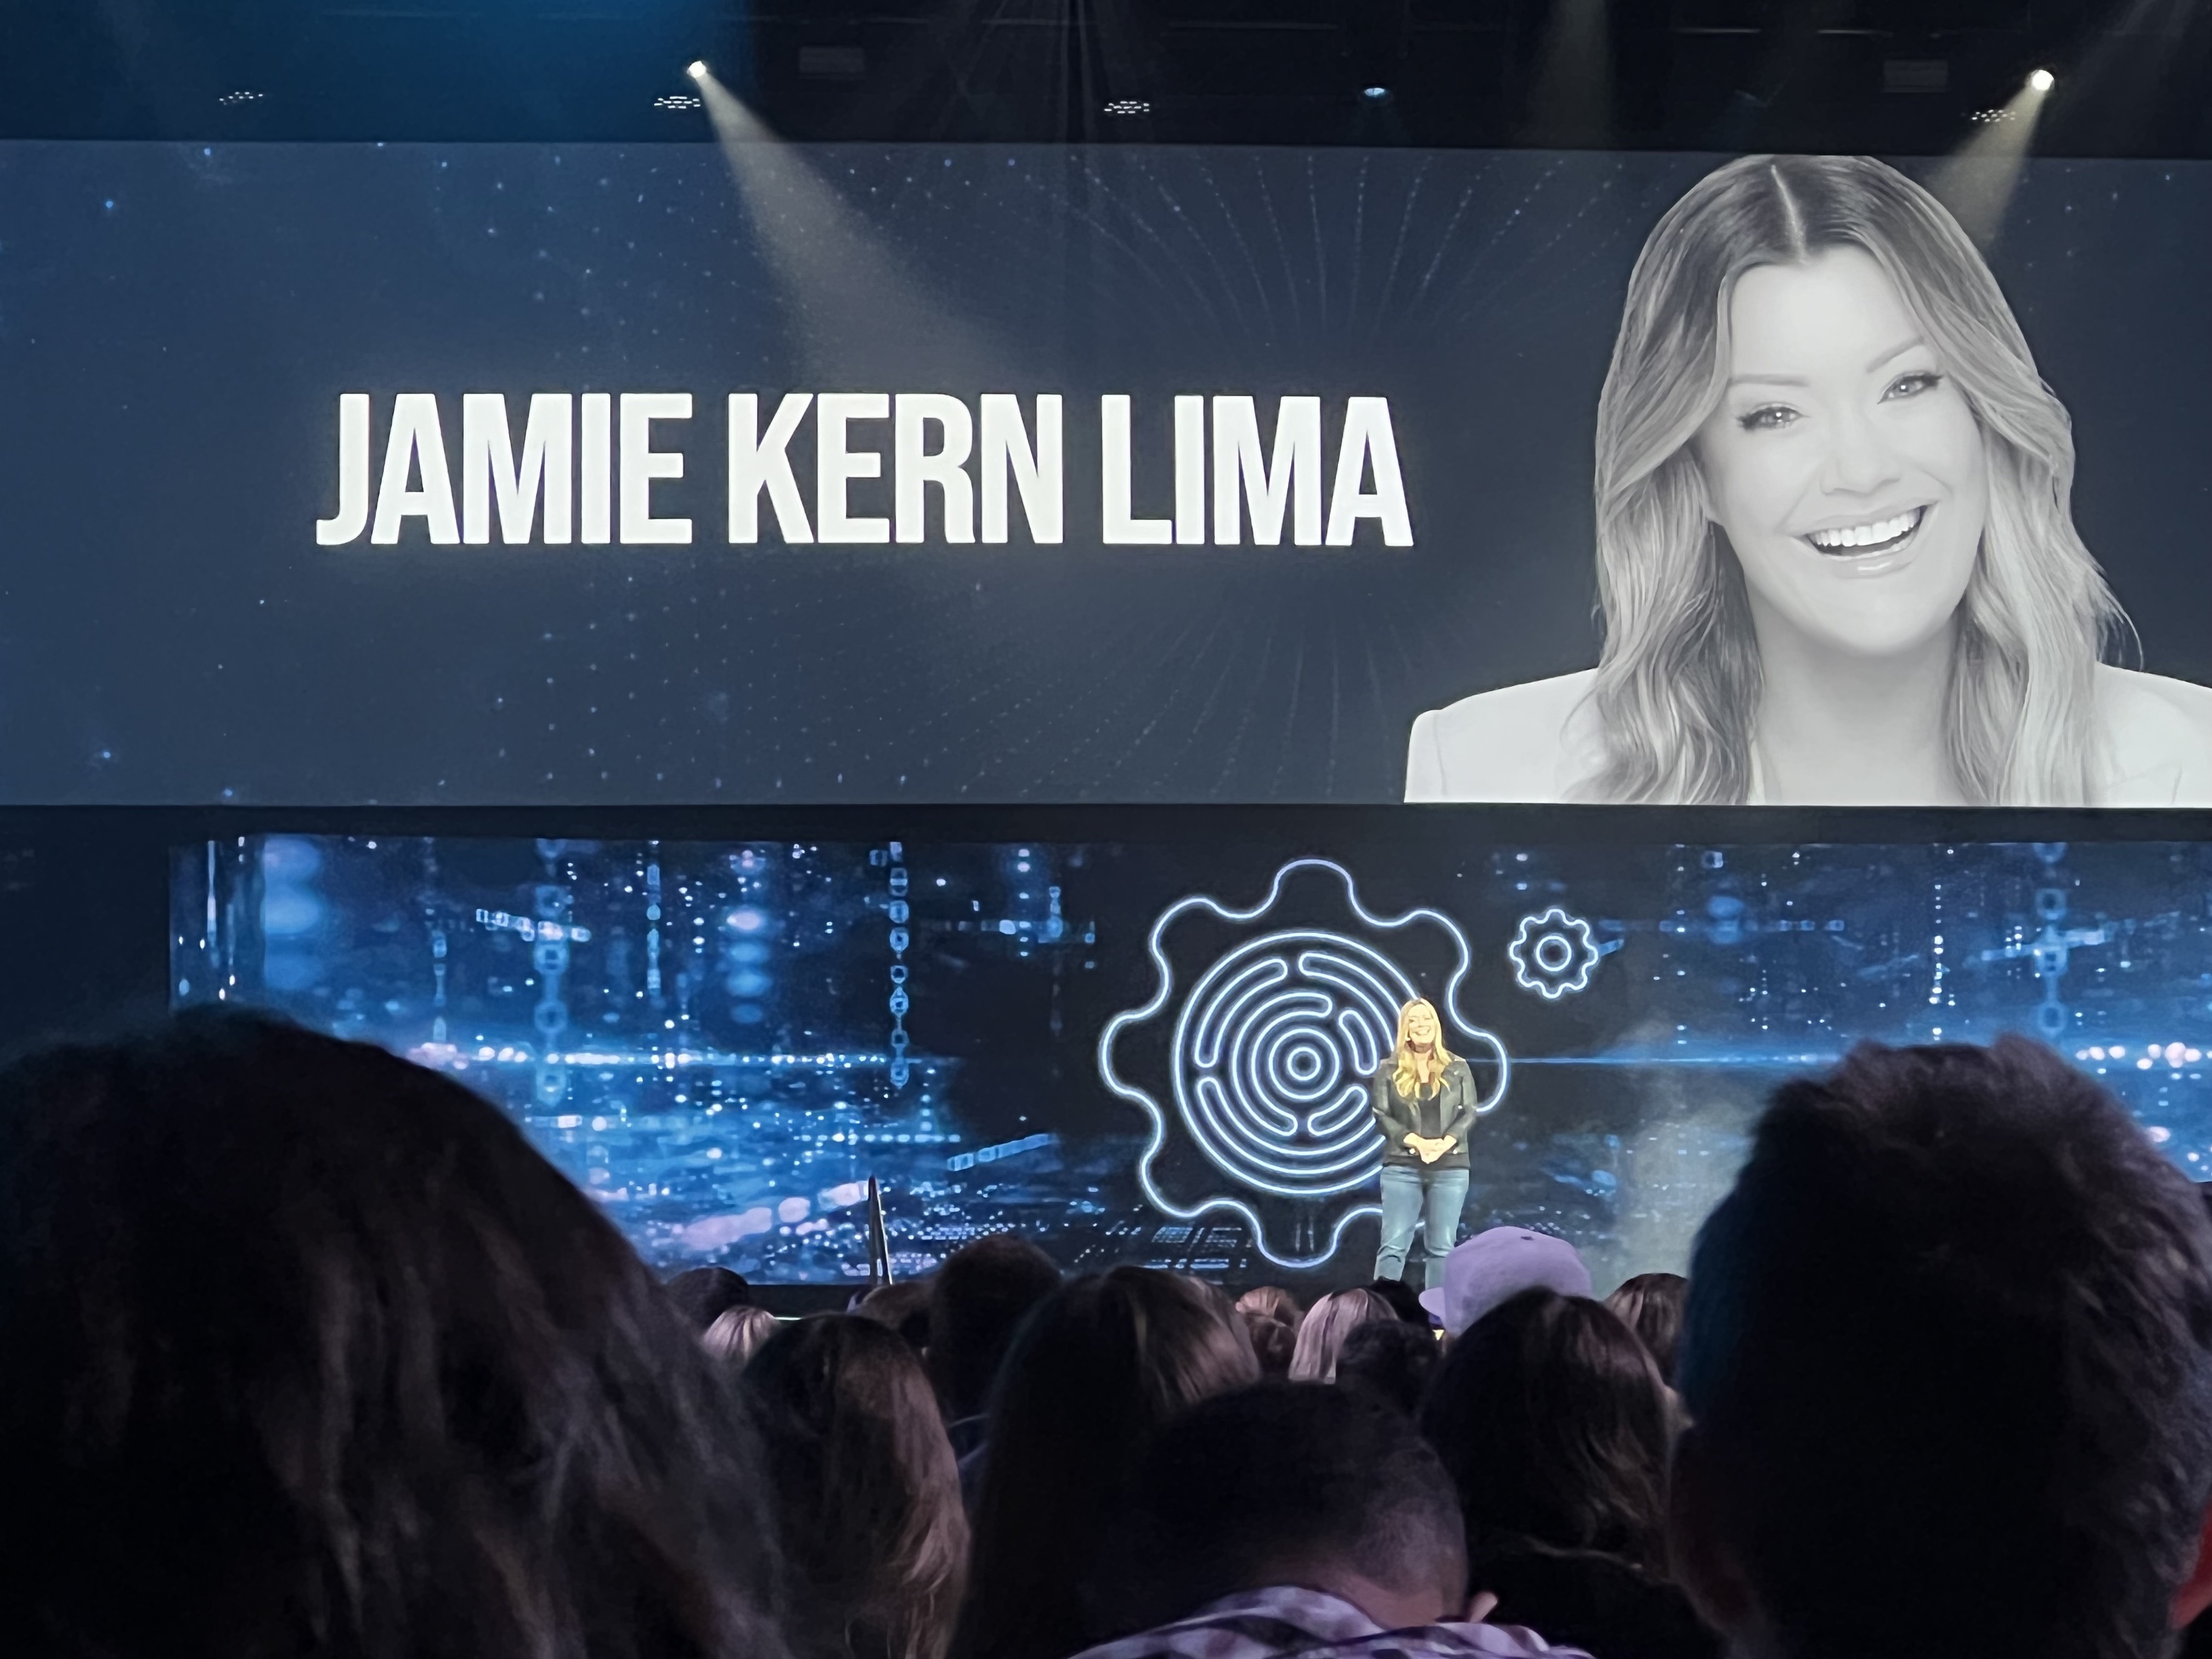 Jamie Kern Lima on stage with a screen advertising her